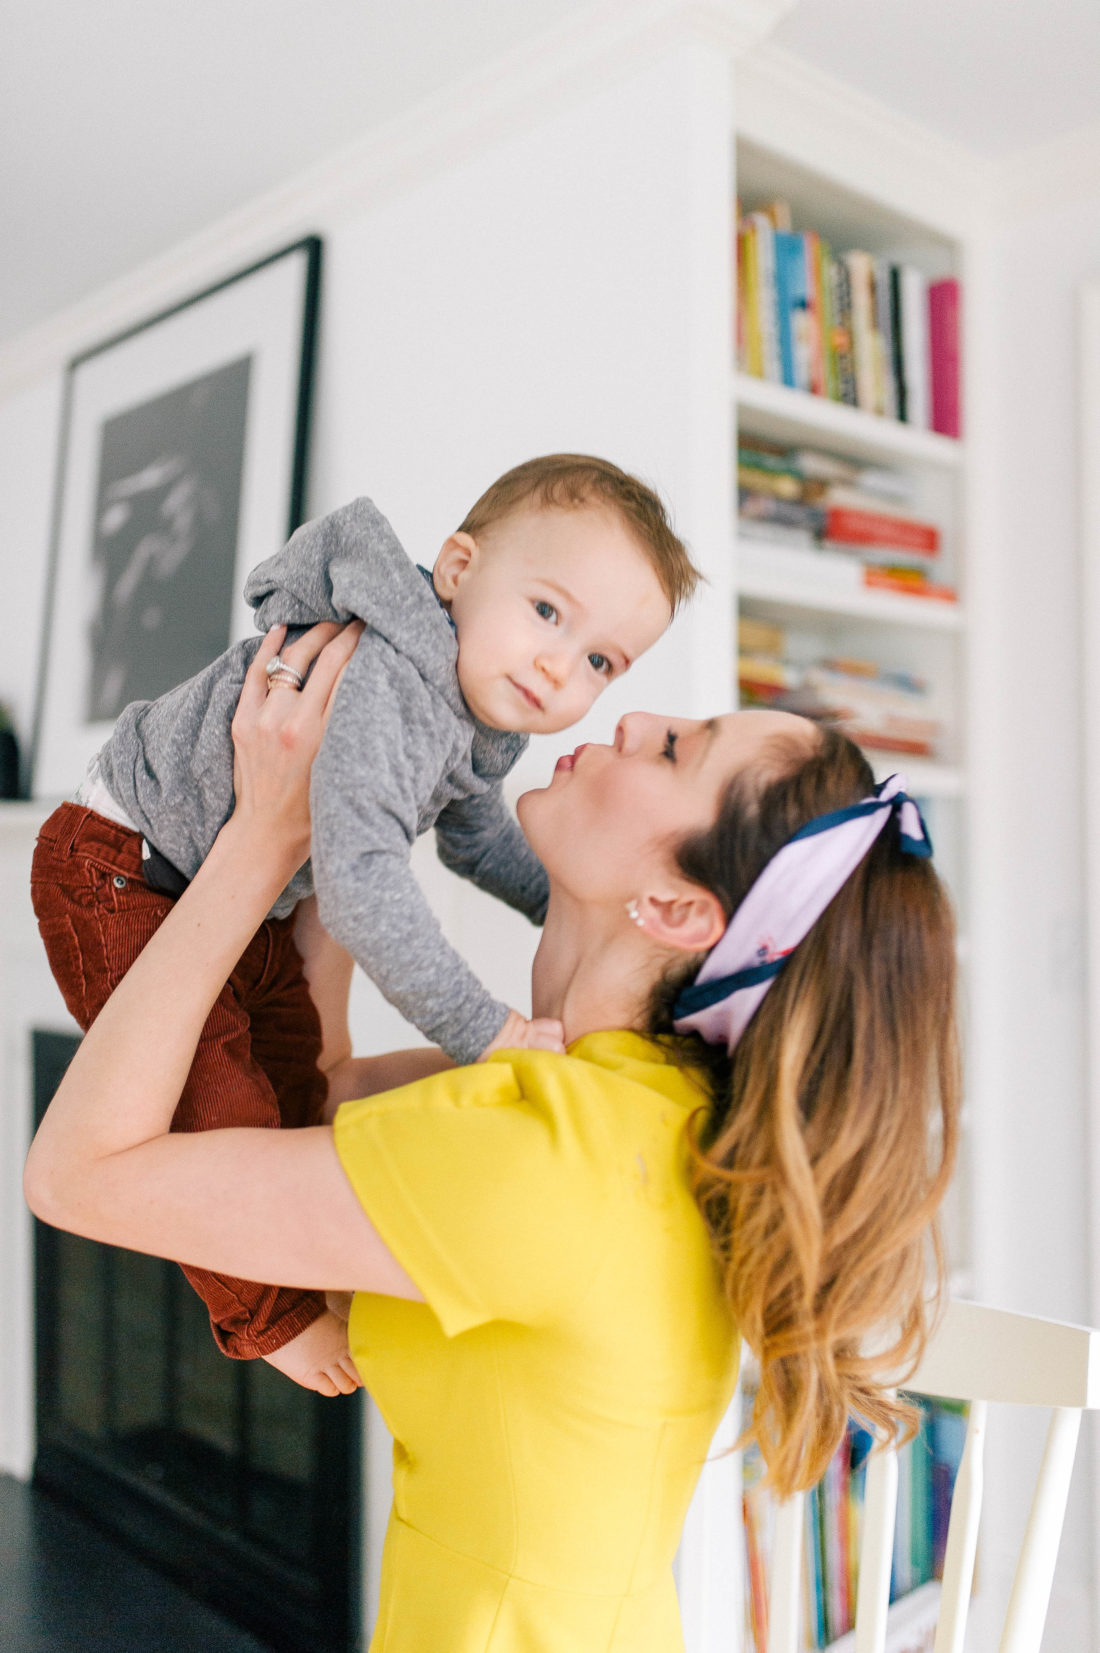 Eva Amurri Martino wears a yellow dress and lifts son Major up in her arms to kiss him